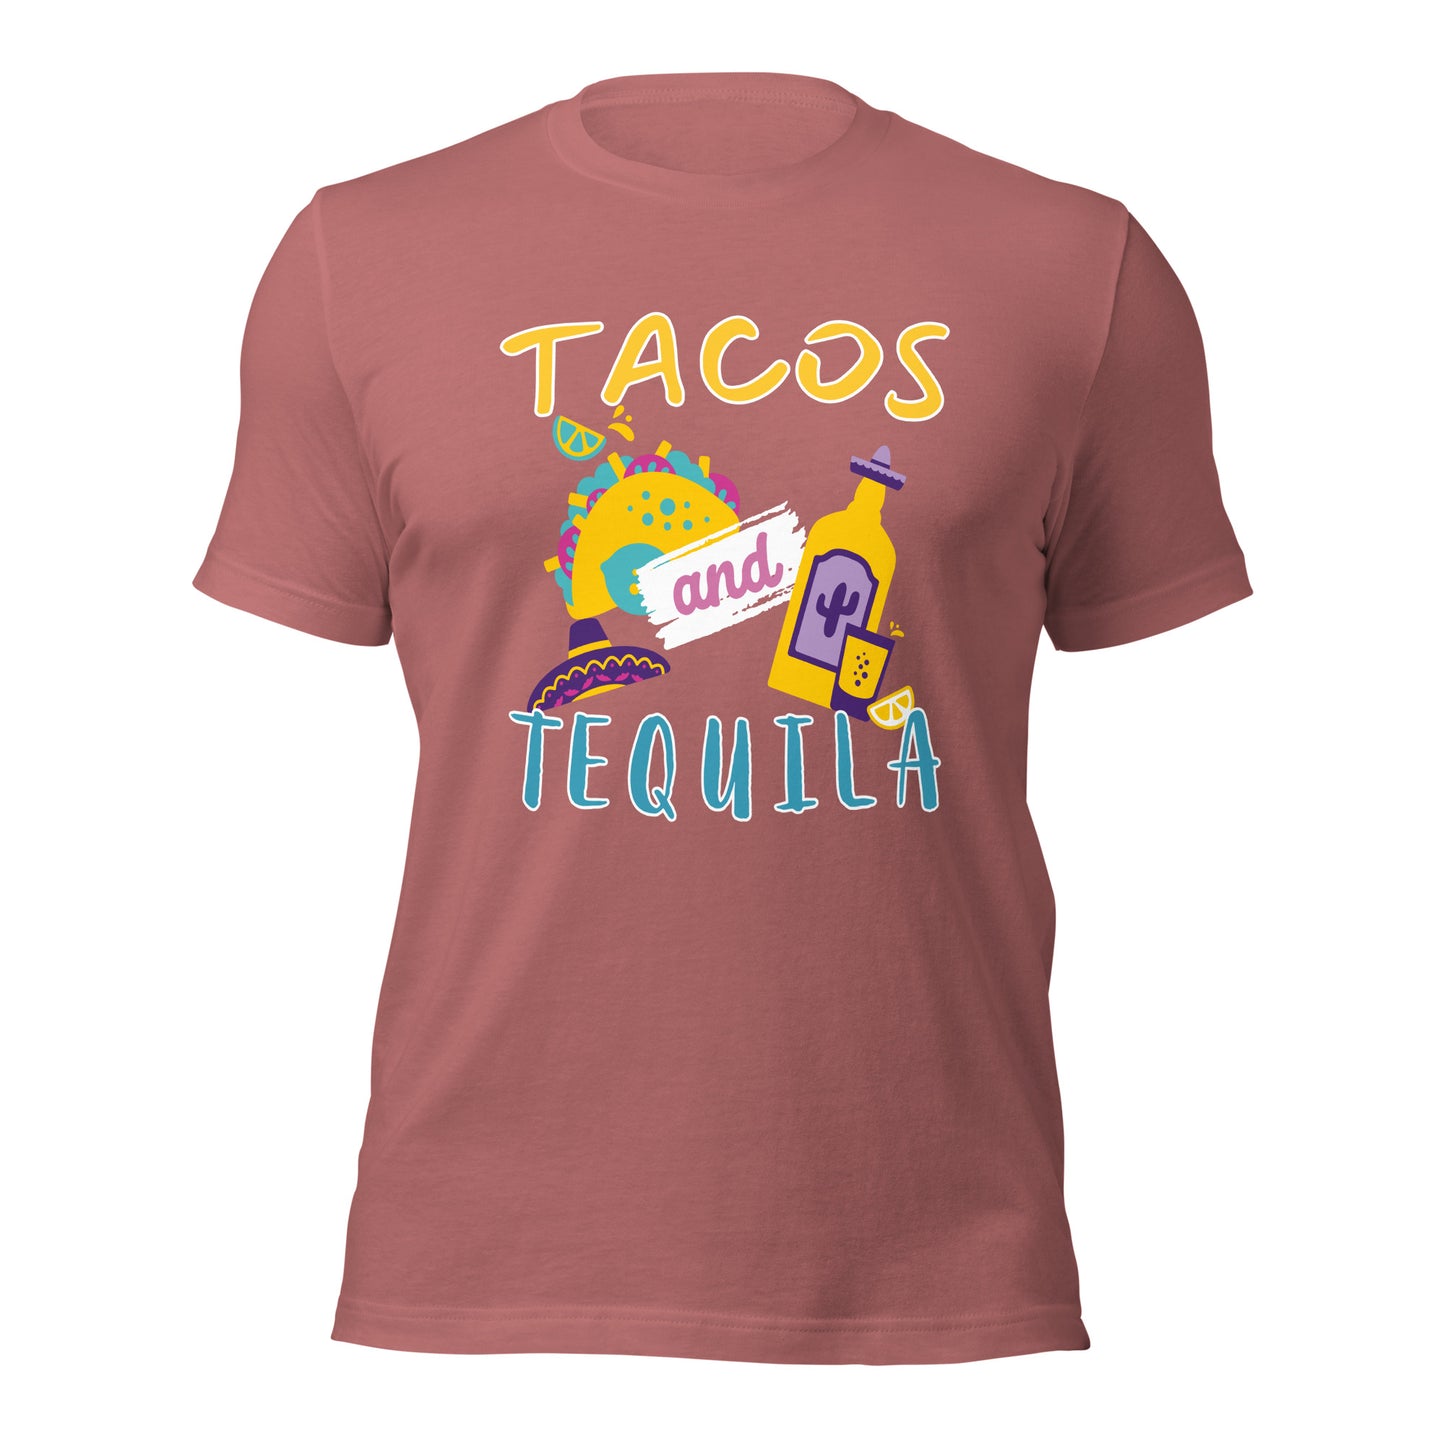 Tacos & Tequila His or Her Tee